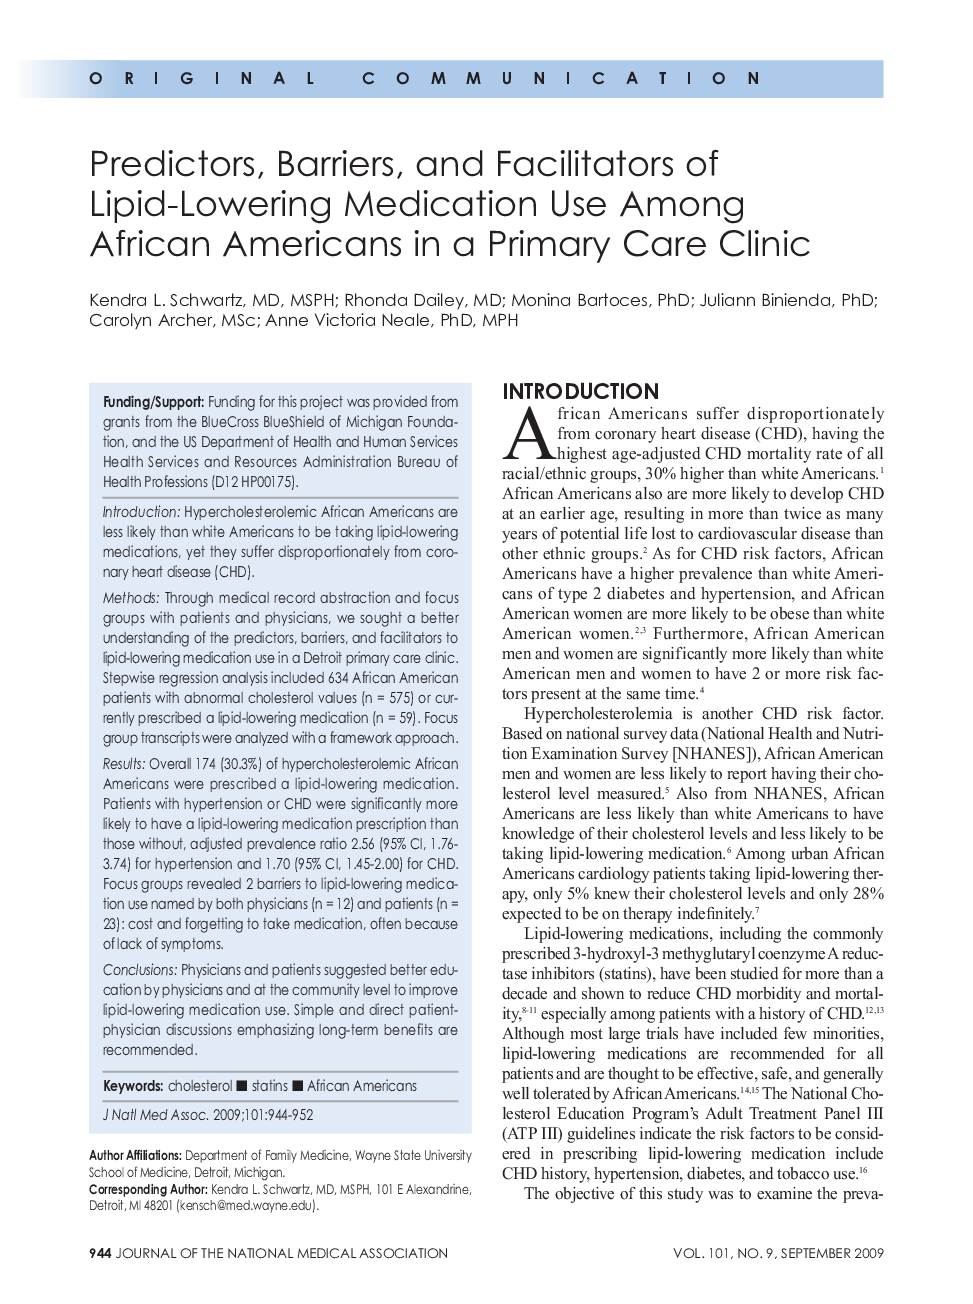 Predictors, Barriers, and Facilitators of Lipid-Lowering Medication Use Among African Americans in a Primary Care Clinic